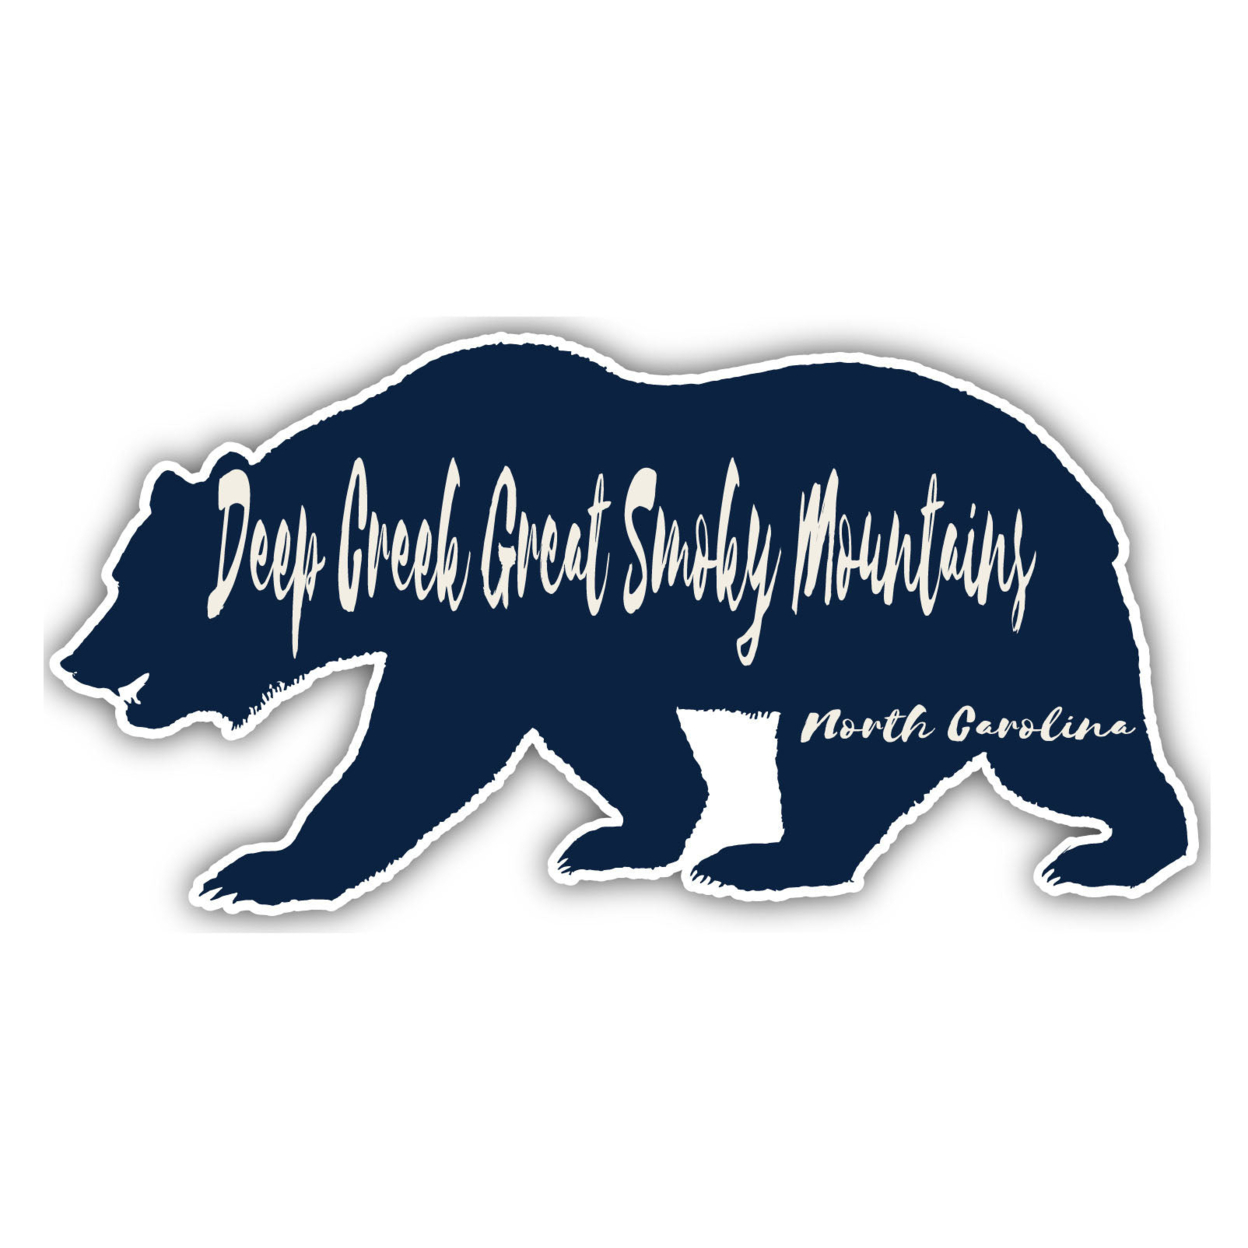 Deep Creek Great Smoky Mountains North Carolina Souvenir Decorative Stickers (Choose Theme And Size) - 4-Pack, 10-Inch, Bear